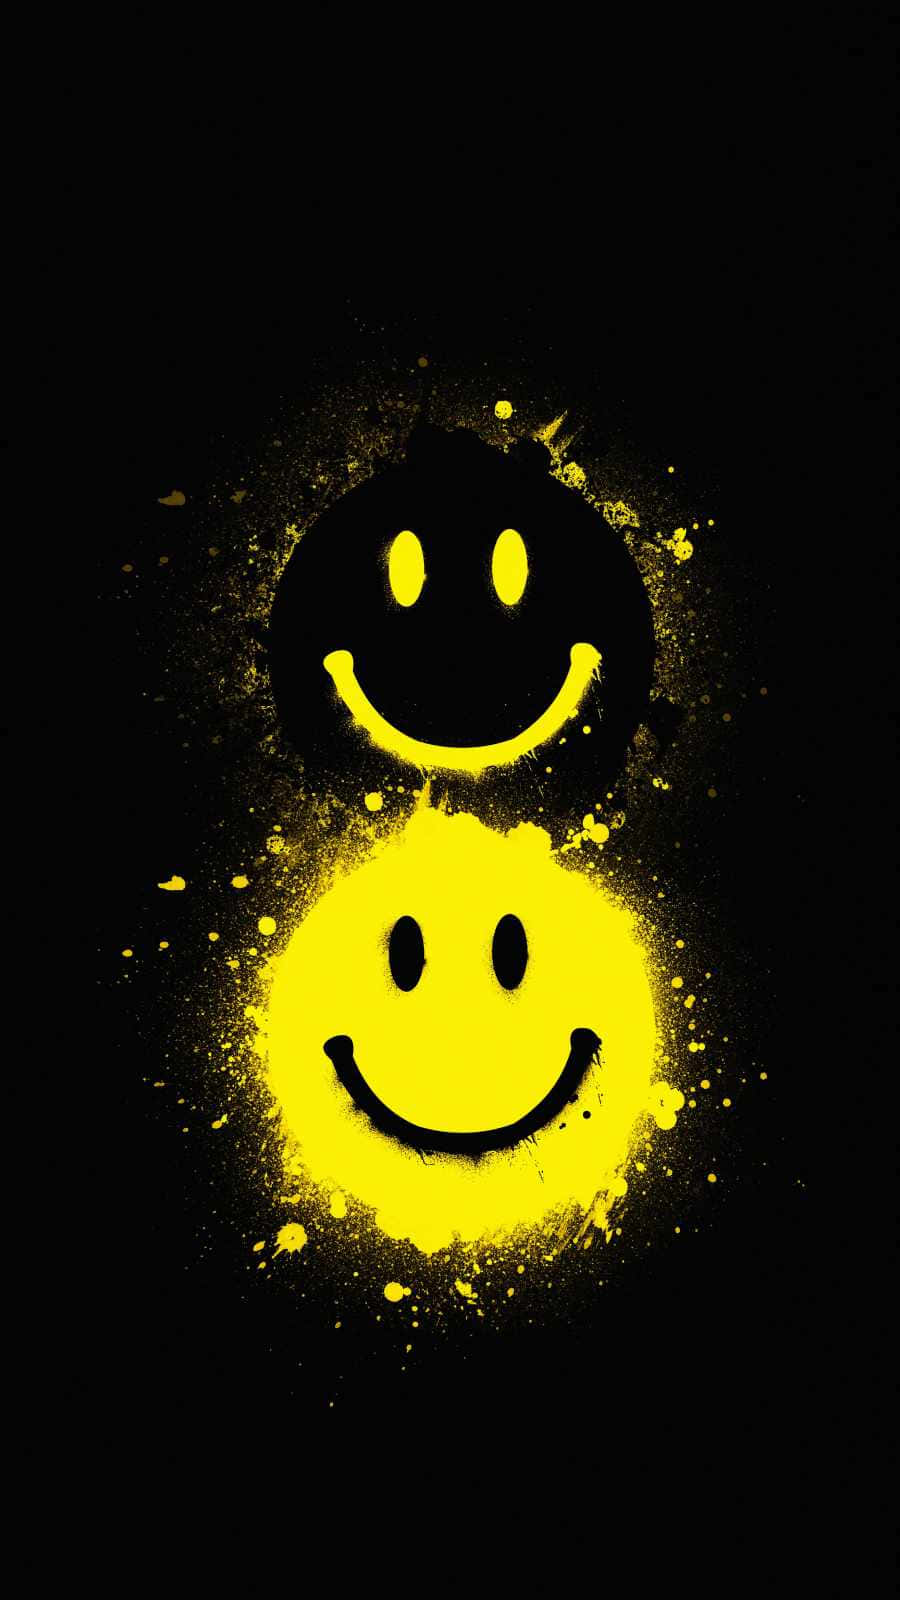 400+] Smiley Face Wallpapers | Wallpapers.com